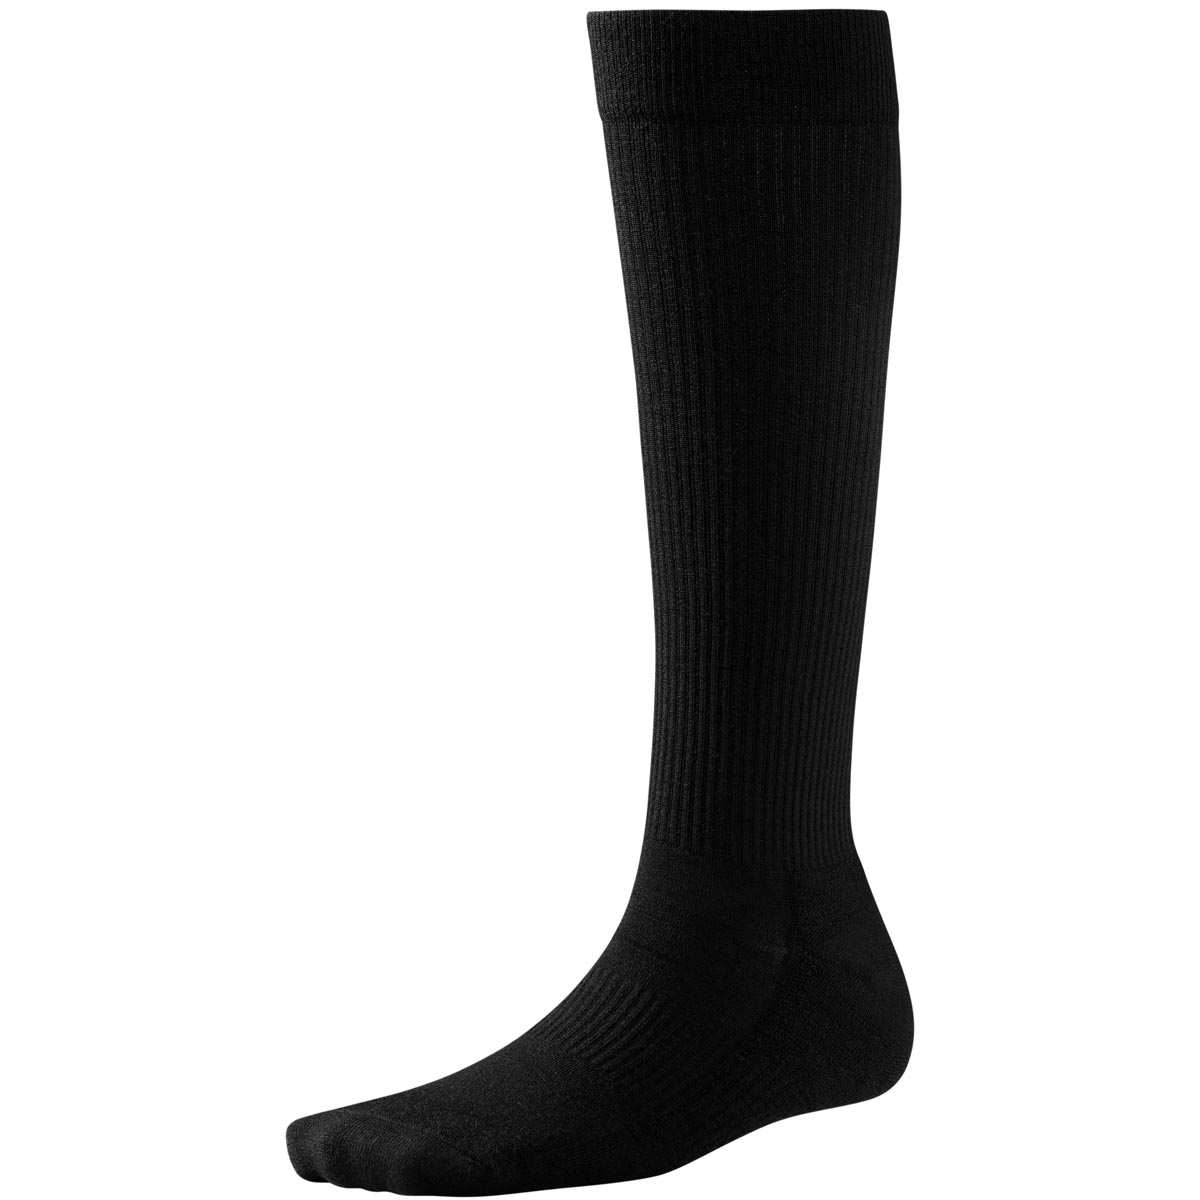 SmartWool Women's StandUP Graduated Compression